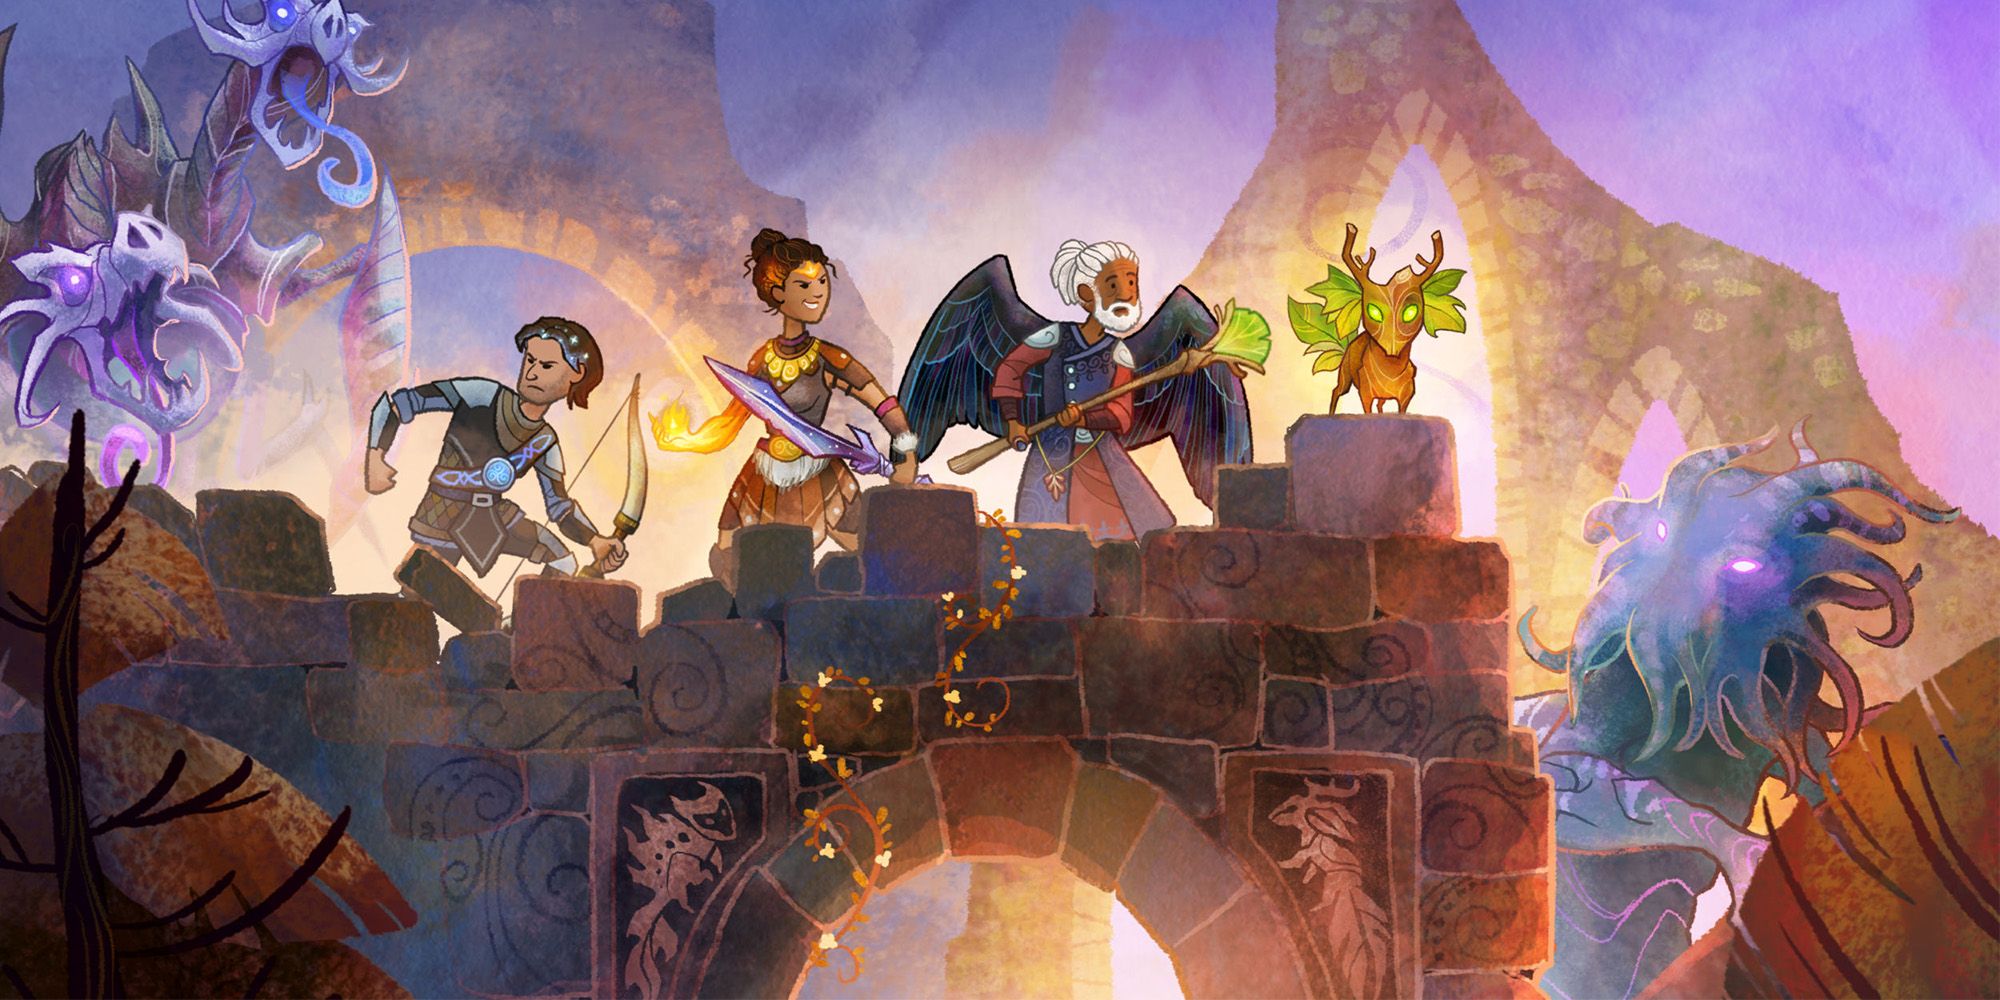 The main characters of Wildermyth on a stone bridge, creatures surrounding them.